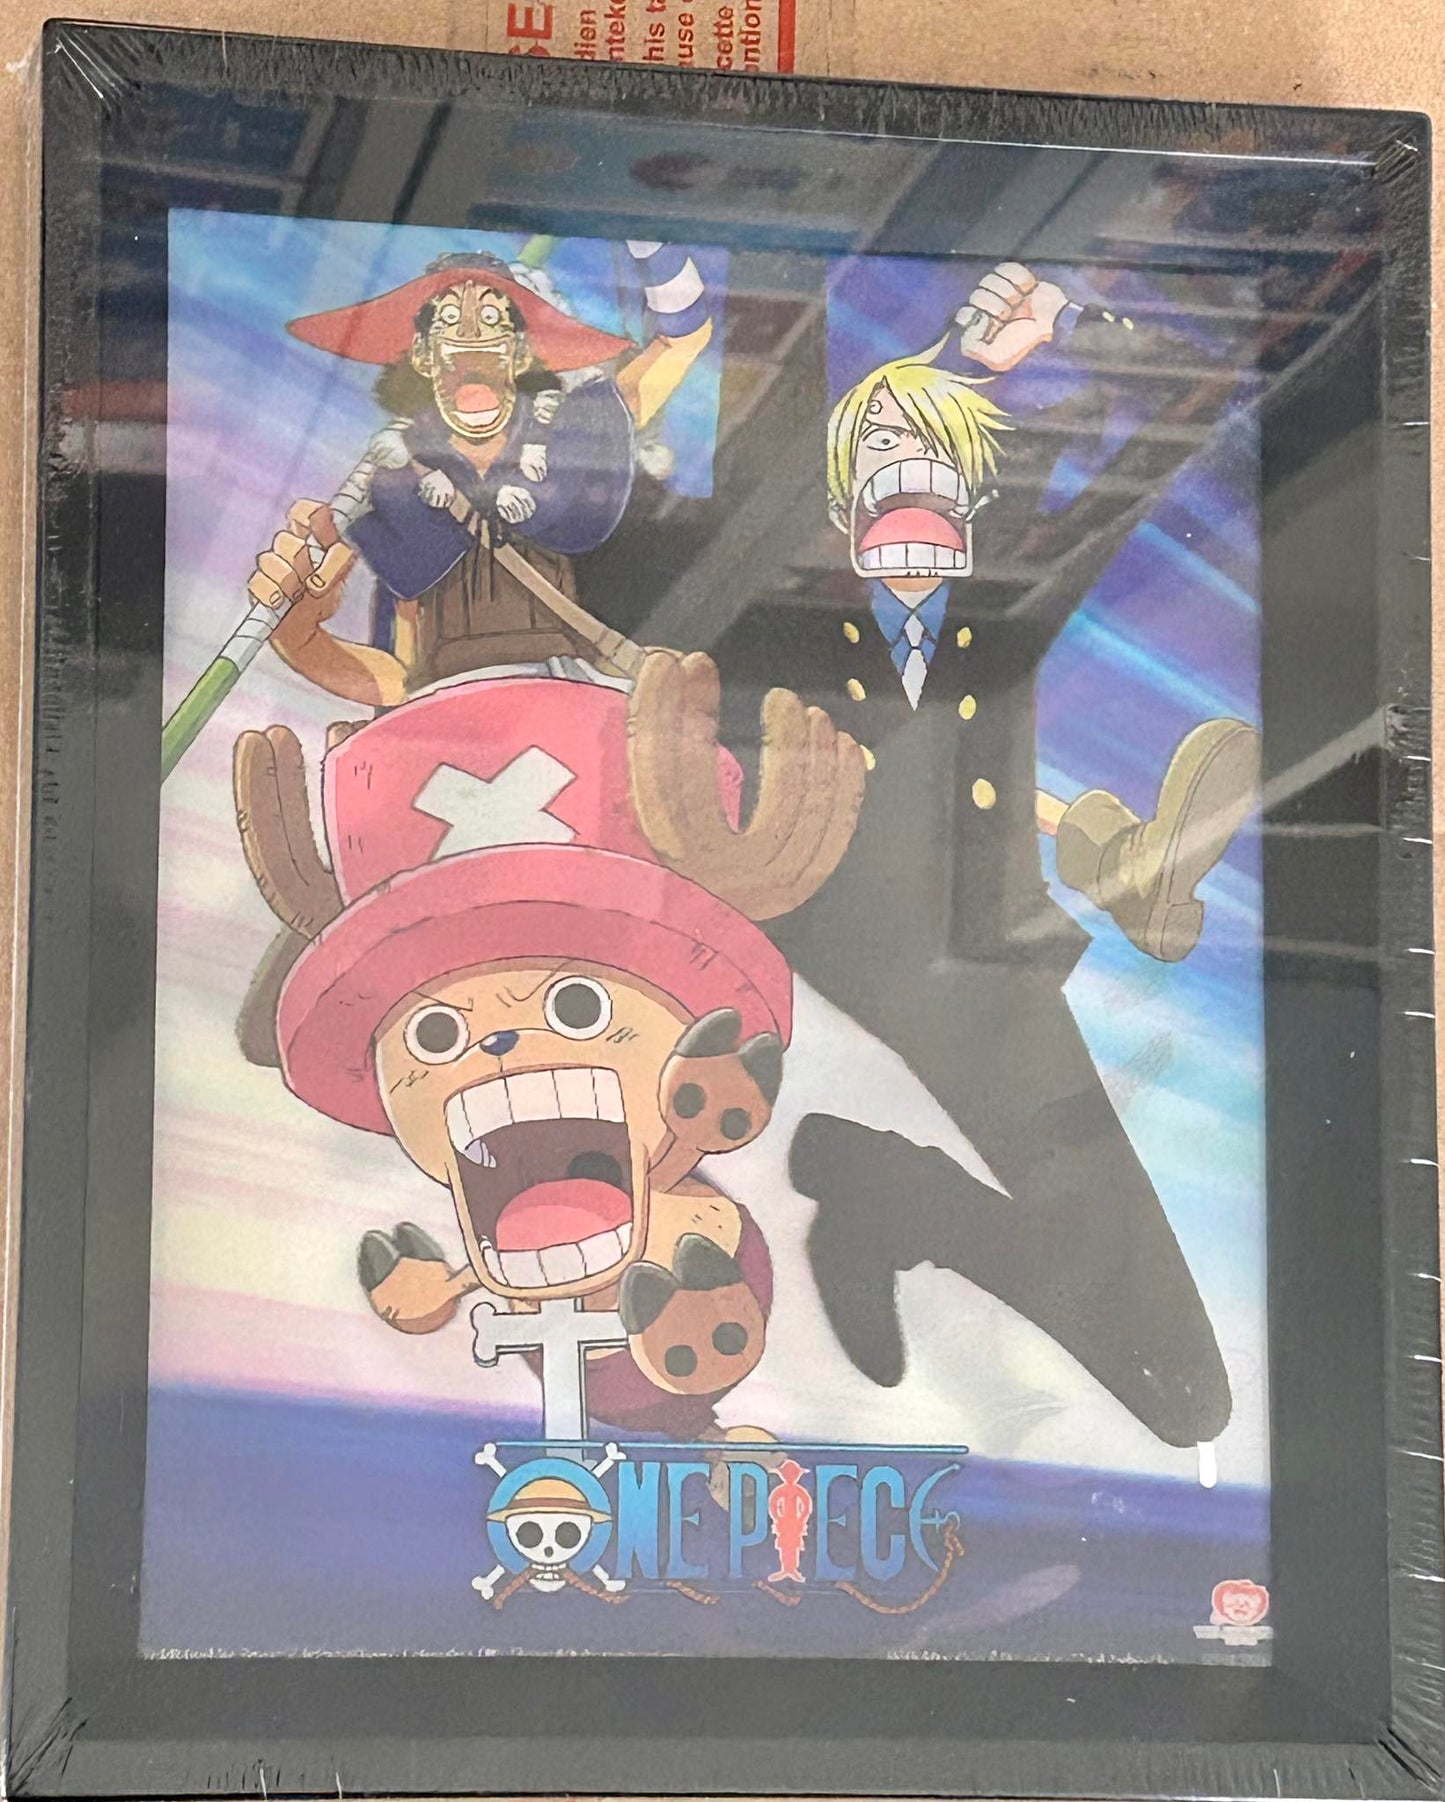 One Piece - Straw hat pirates assault - Poster lenticulaire 3D - 26 x 20 cm